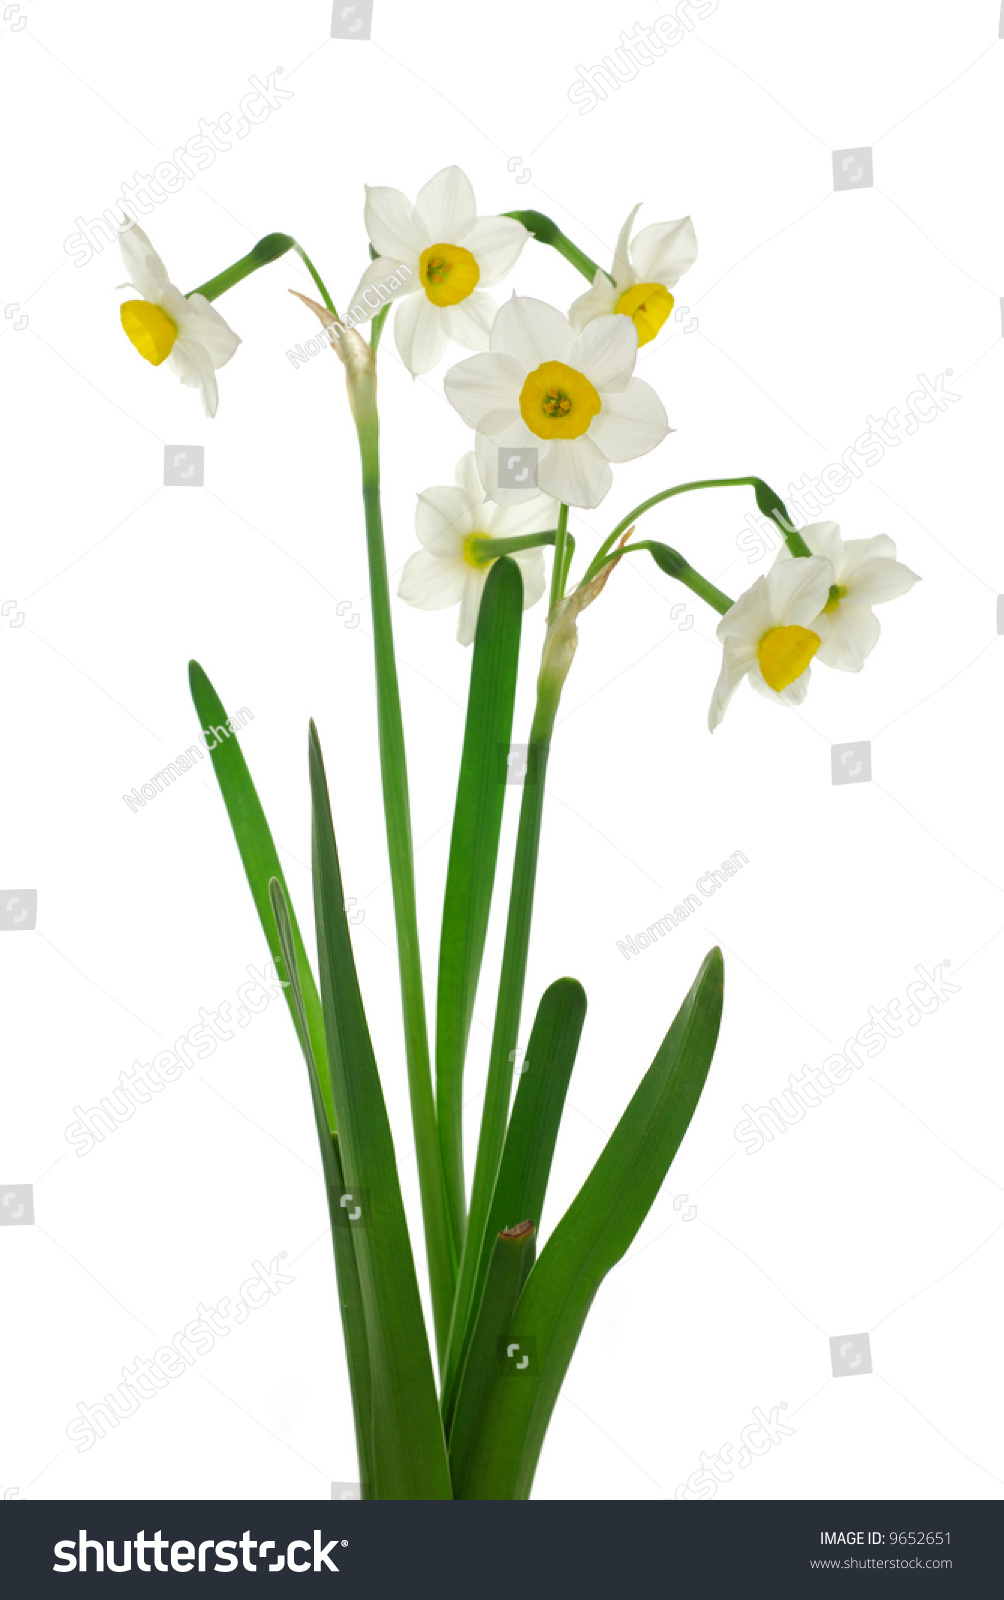 Daffodil dissection :: parts of a flower lesson